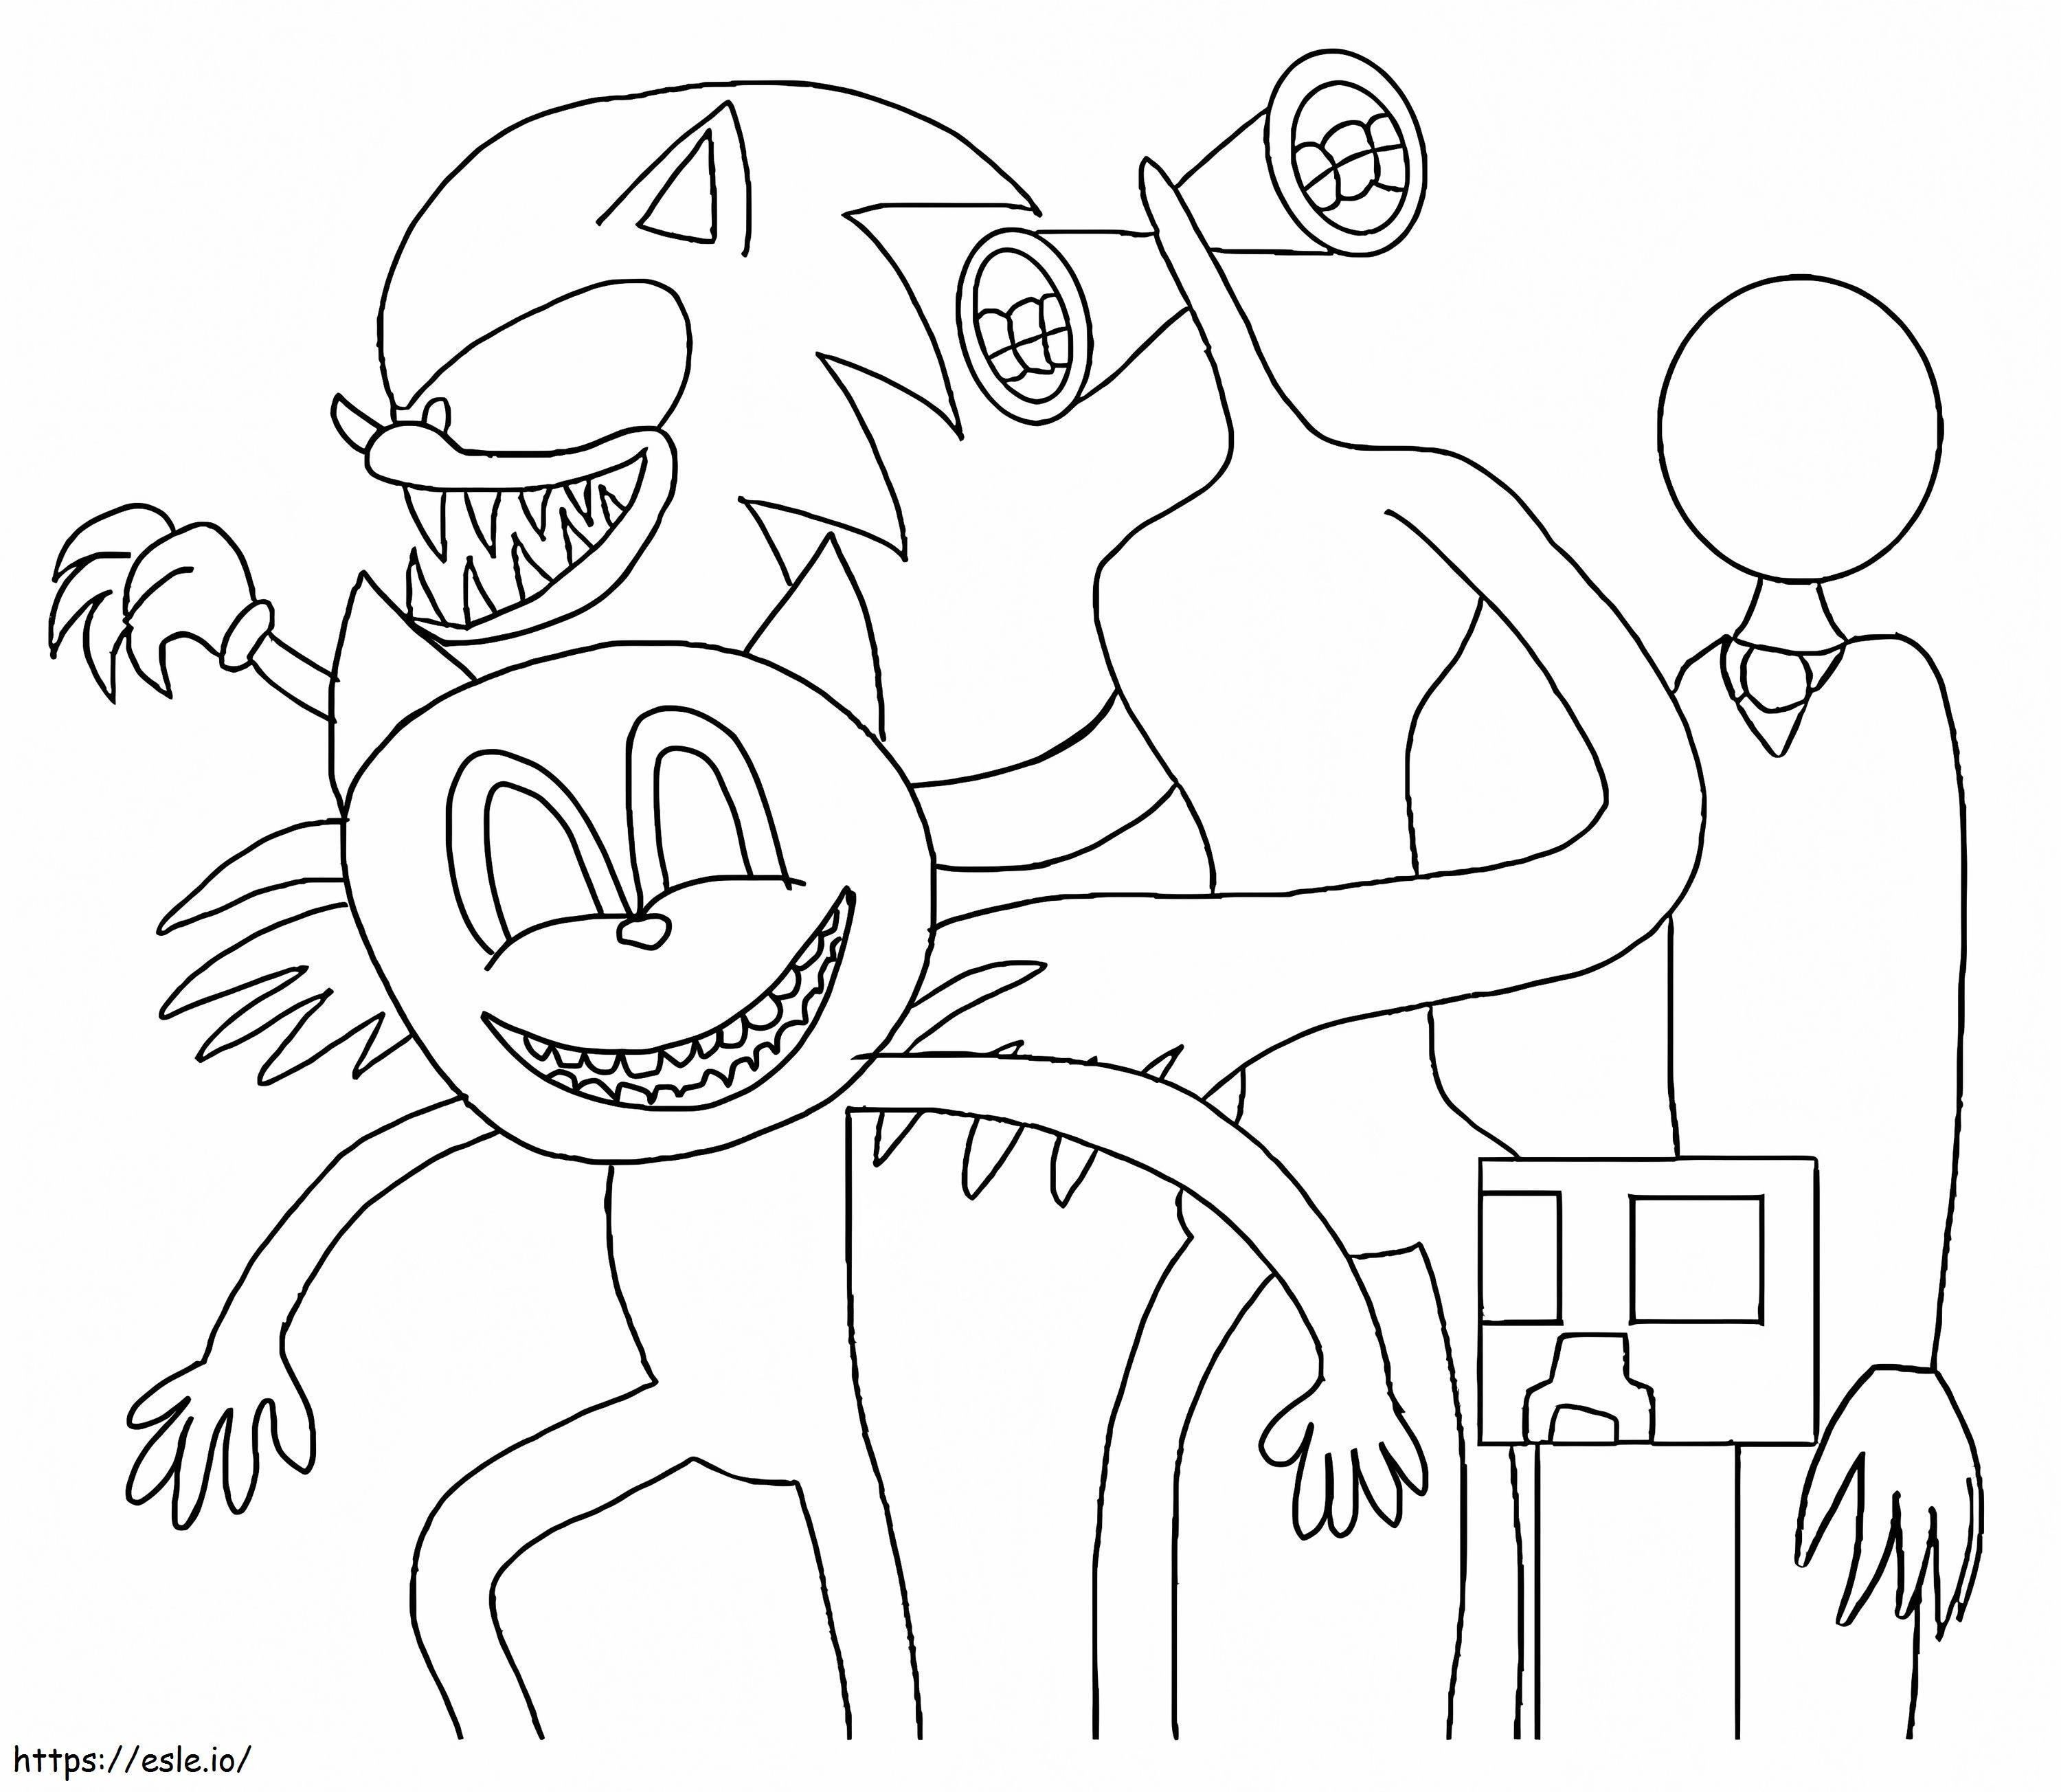 Cartoon Cat And Monsters coloring page